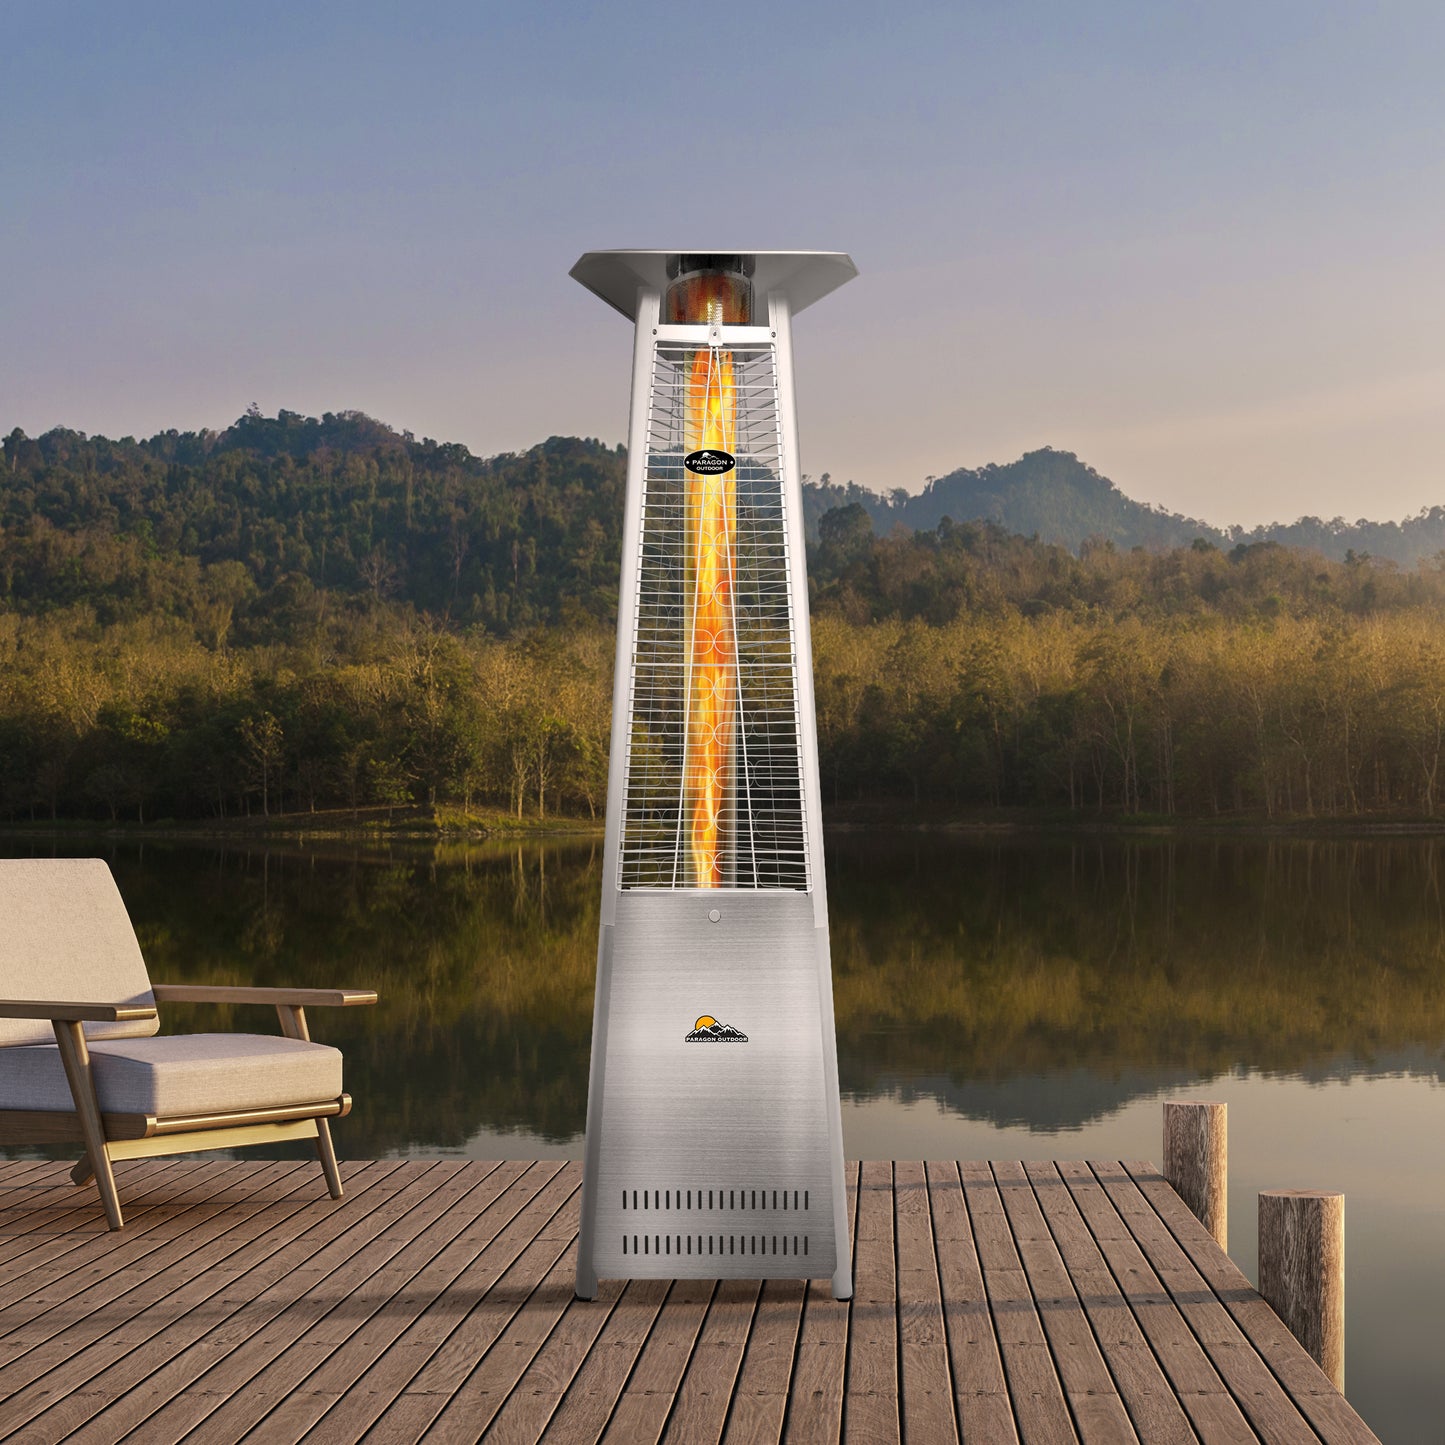 Vesta Elevate Stainless Steel Flame Tower Heater, 92.5”  42,000 BTUs - Propane